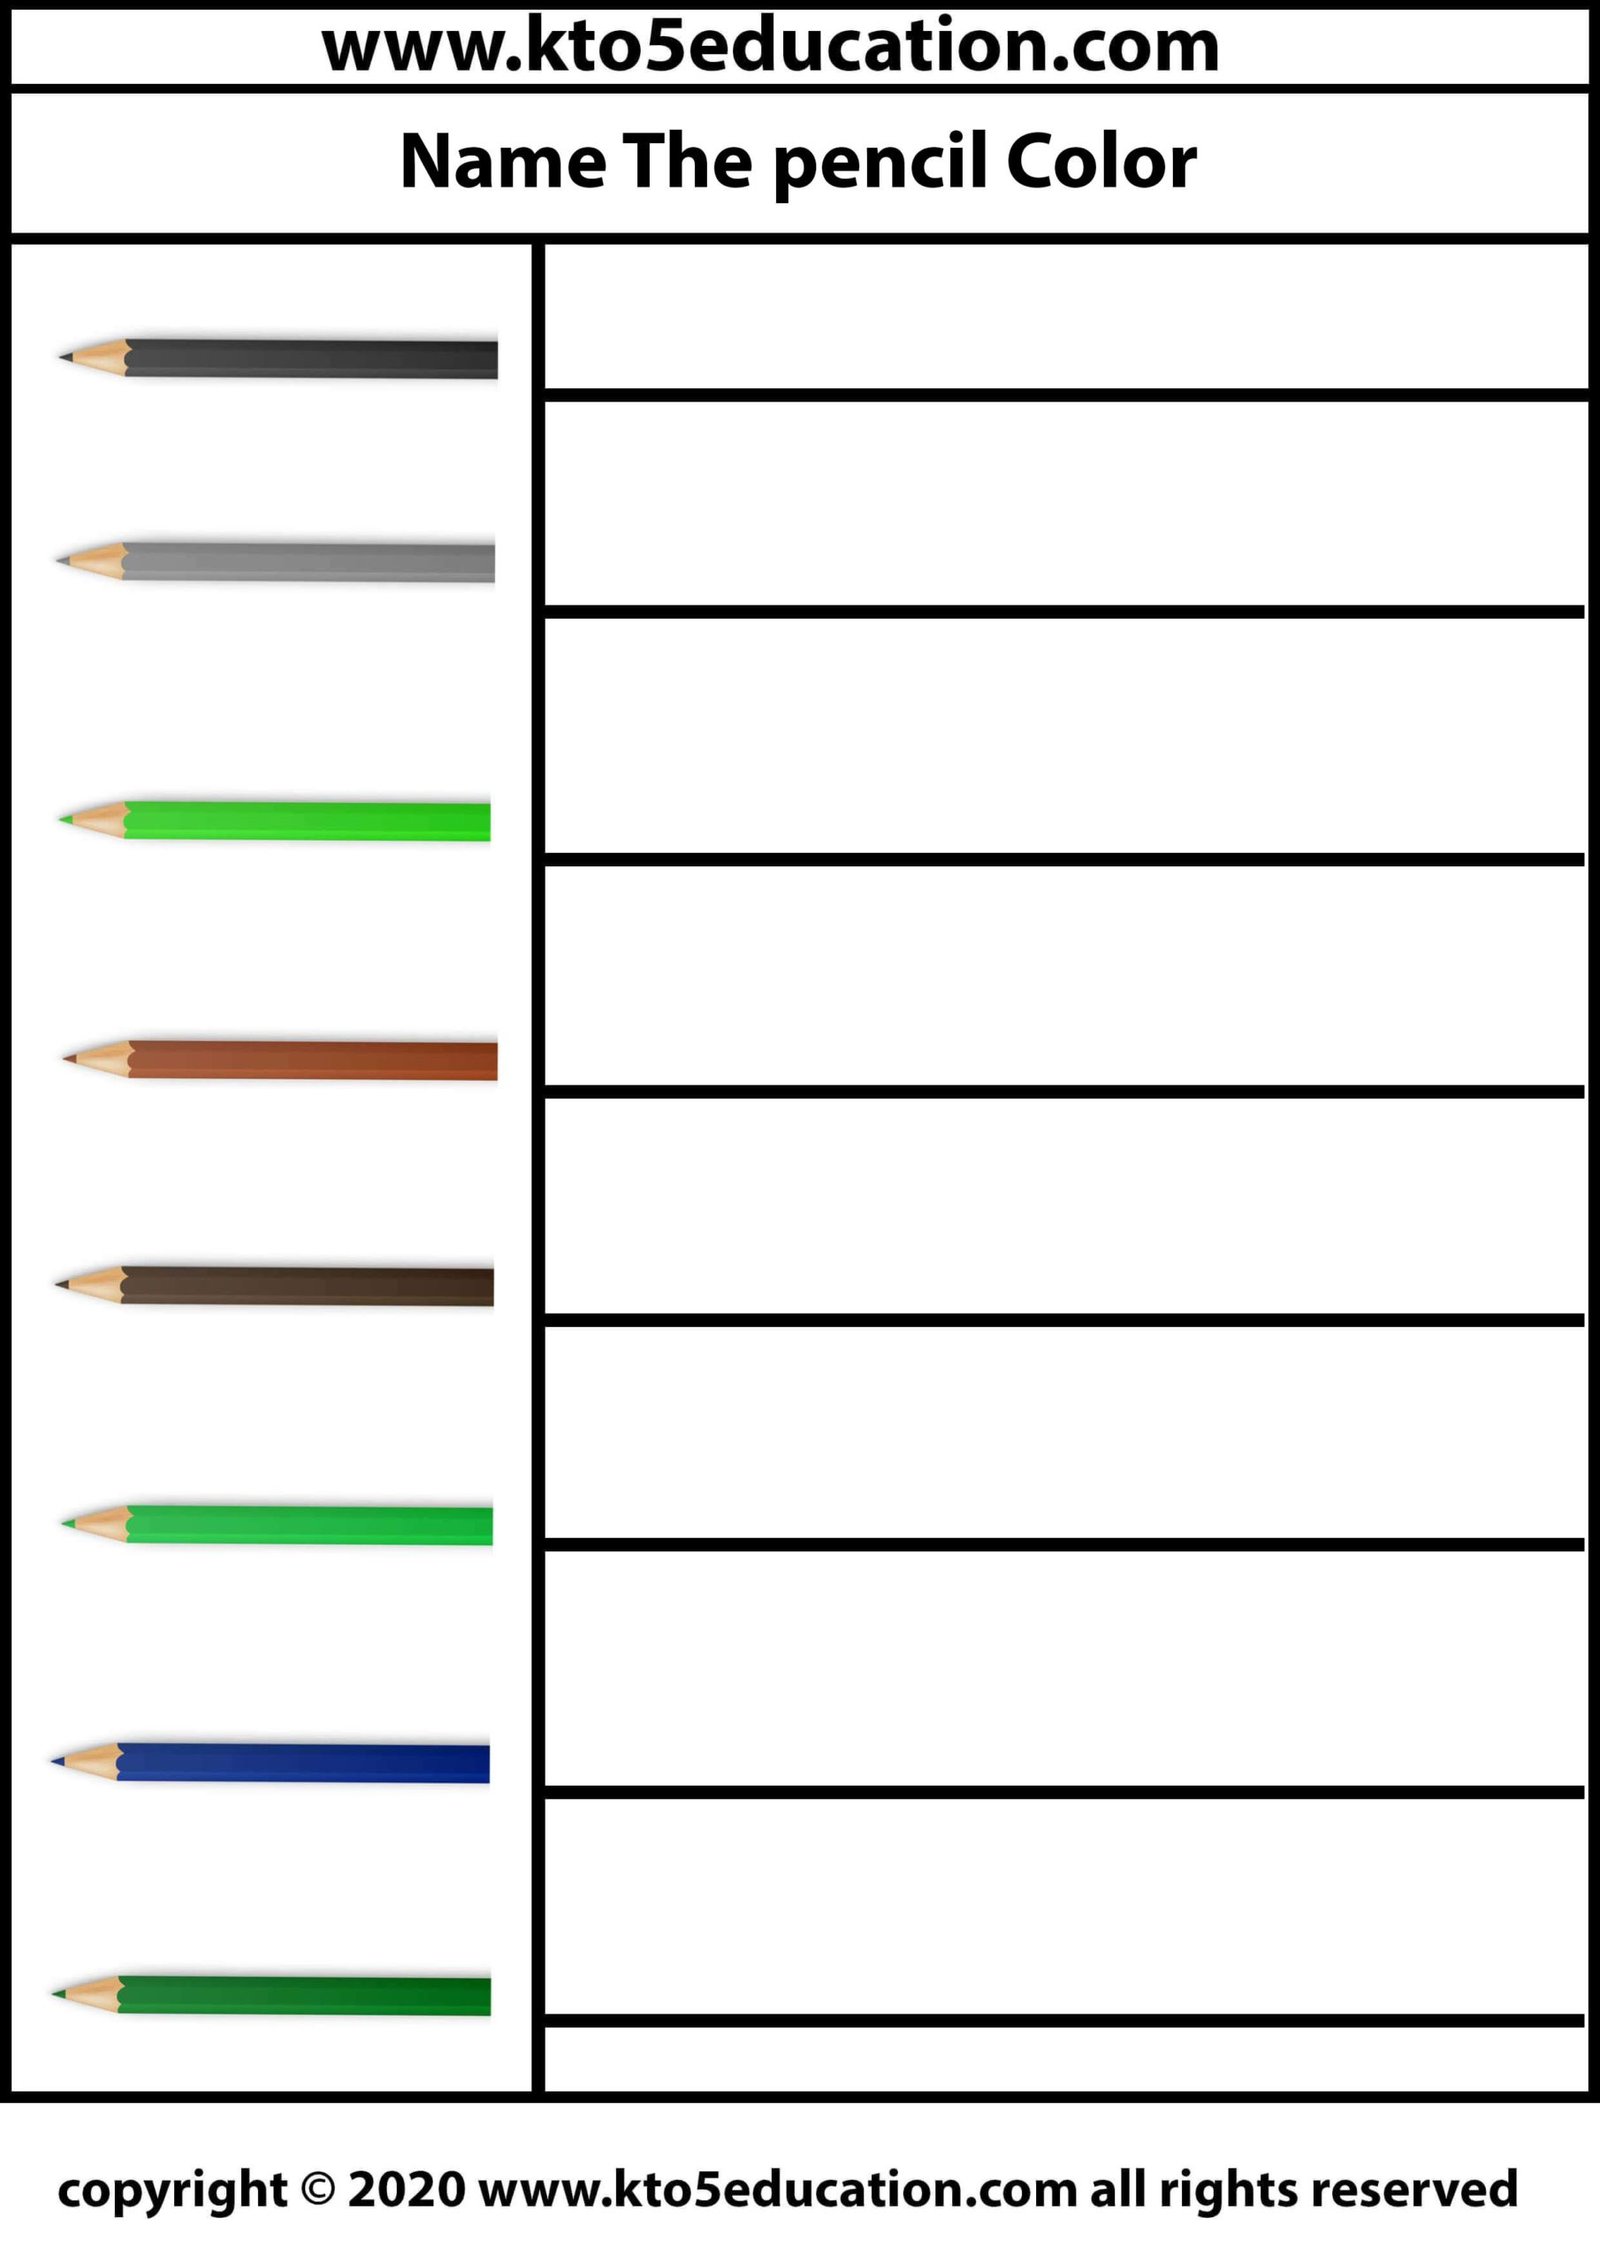 Name the Pencil Color worksheet 4